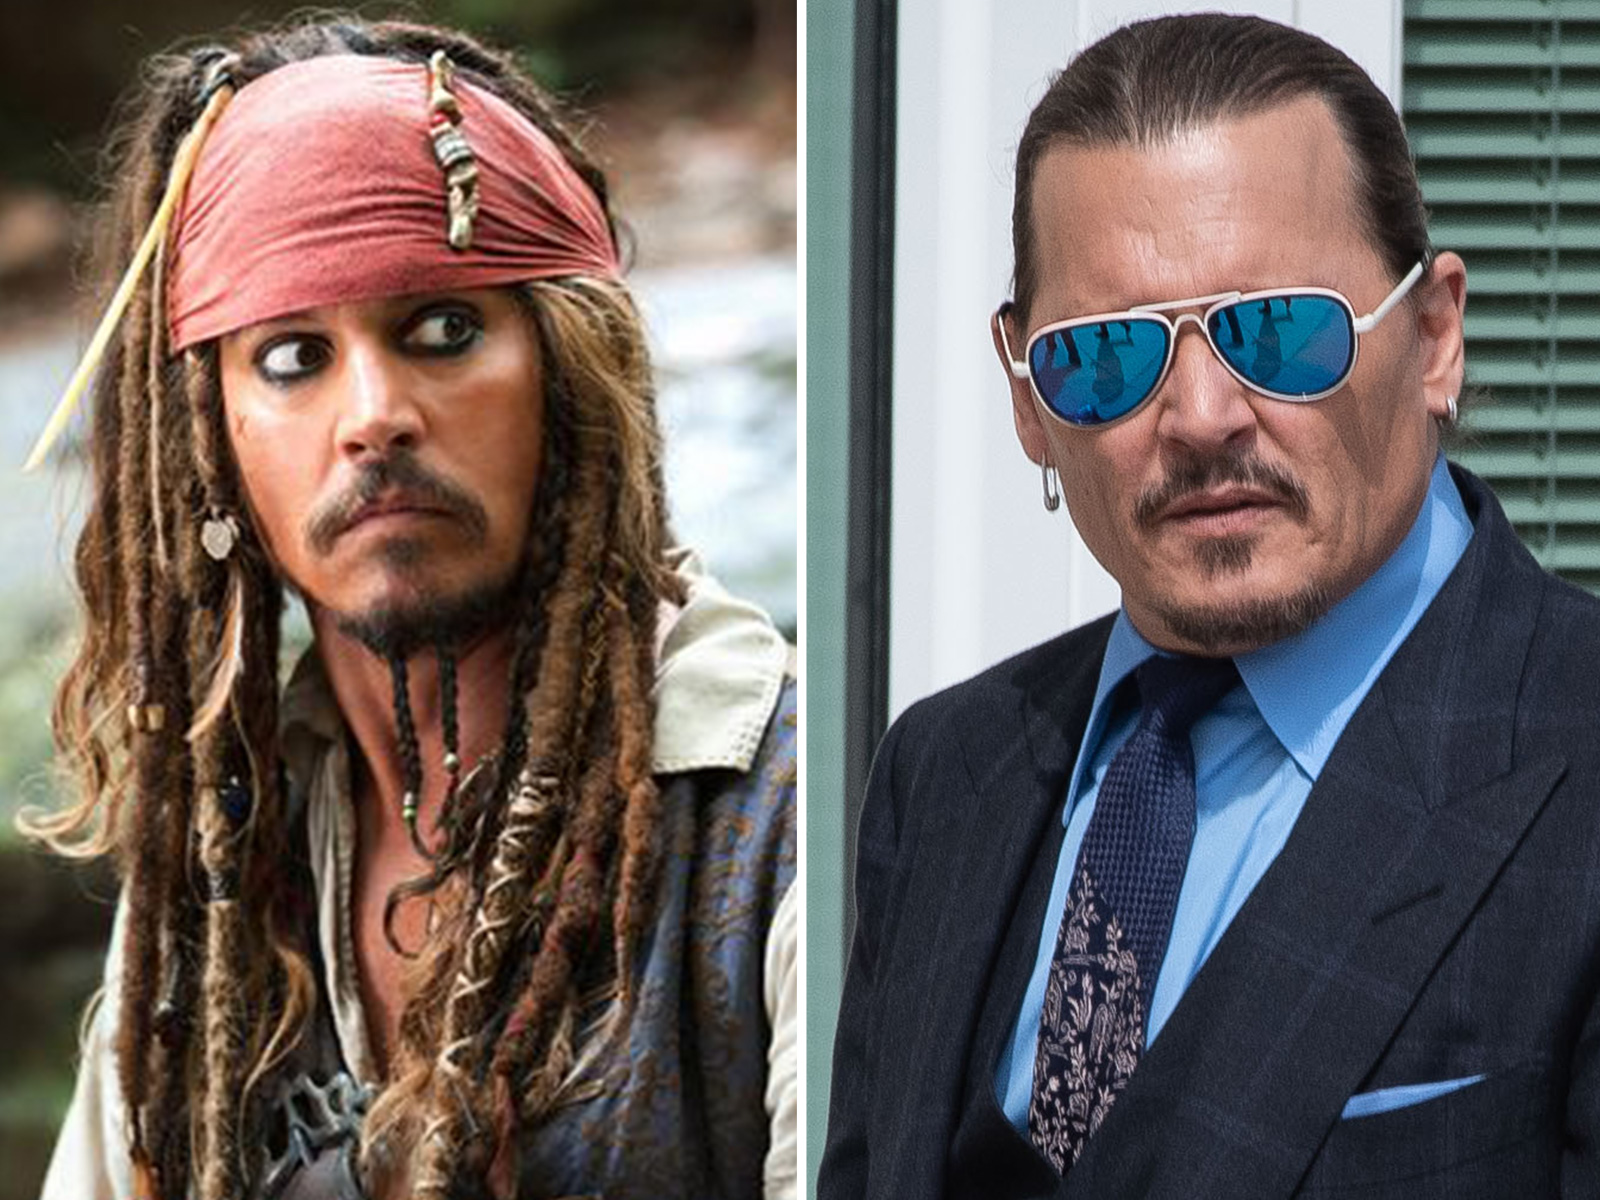 Johnny Depp Fans Demand Disney Apology After His Face Used in Light Show thumbnail